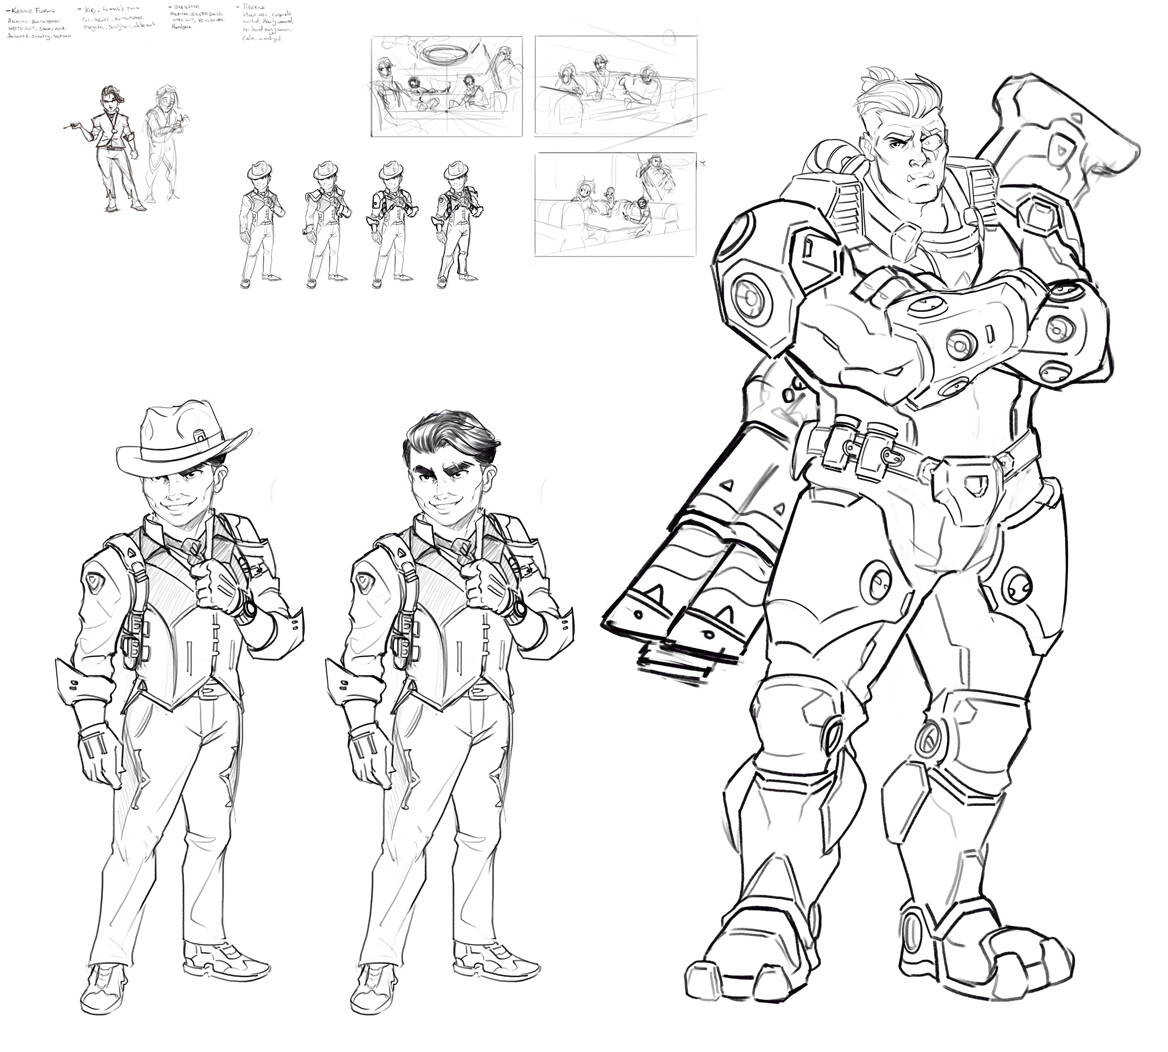 Figuring out some of the designs for the characters in the scene